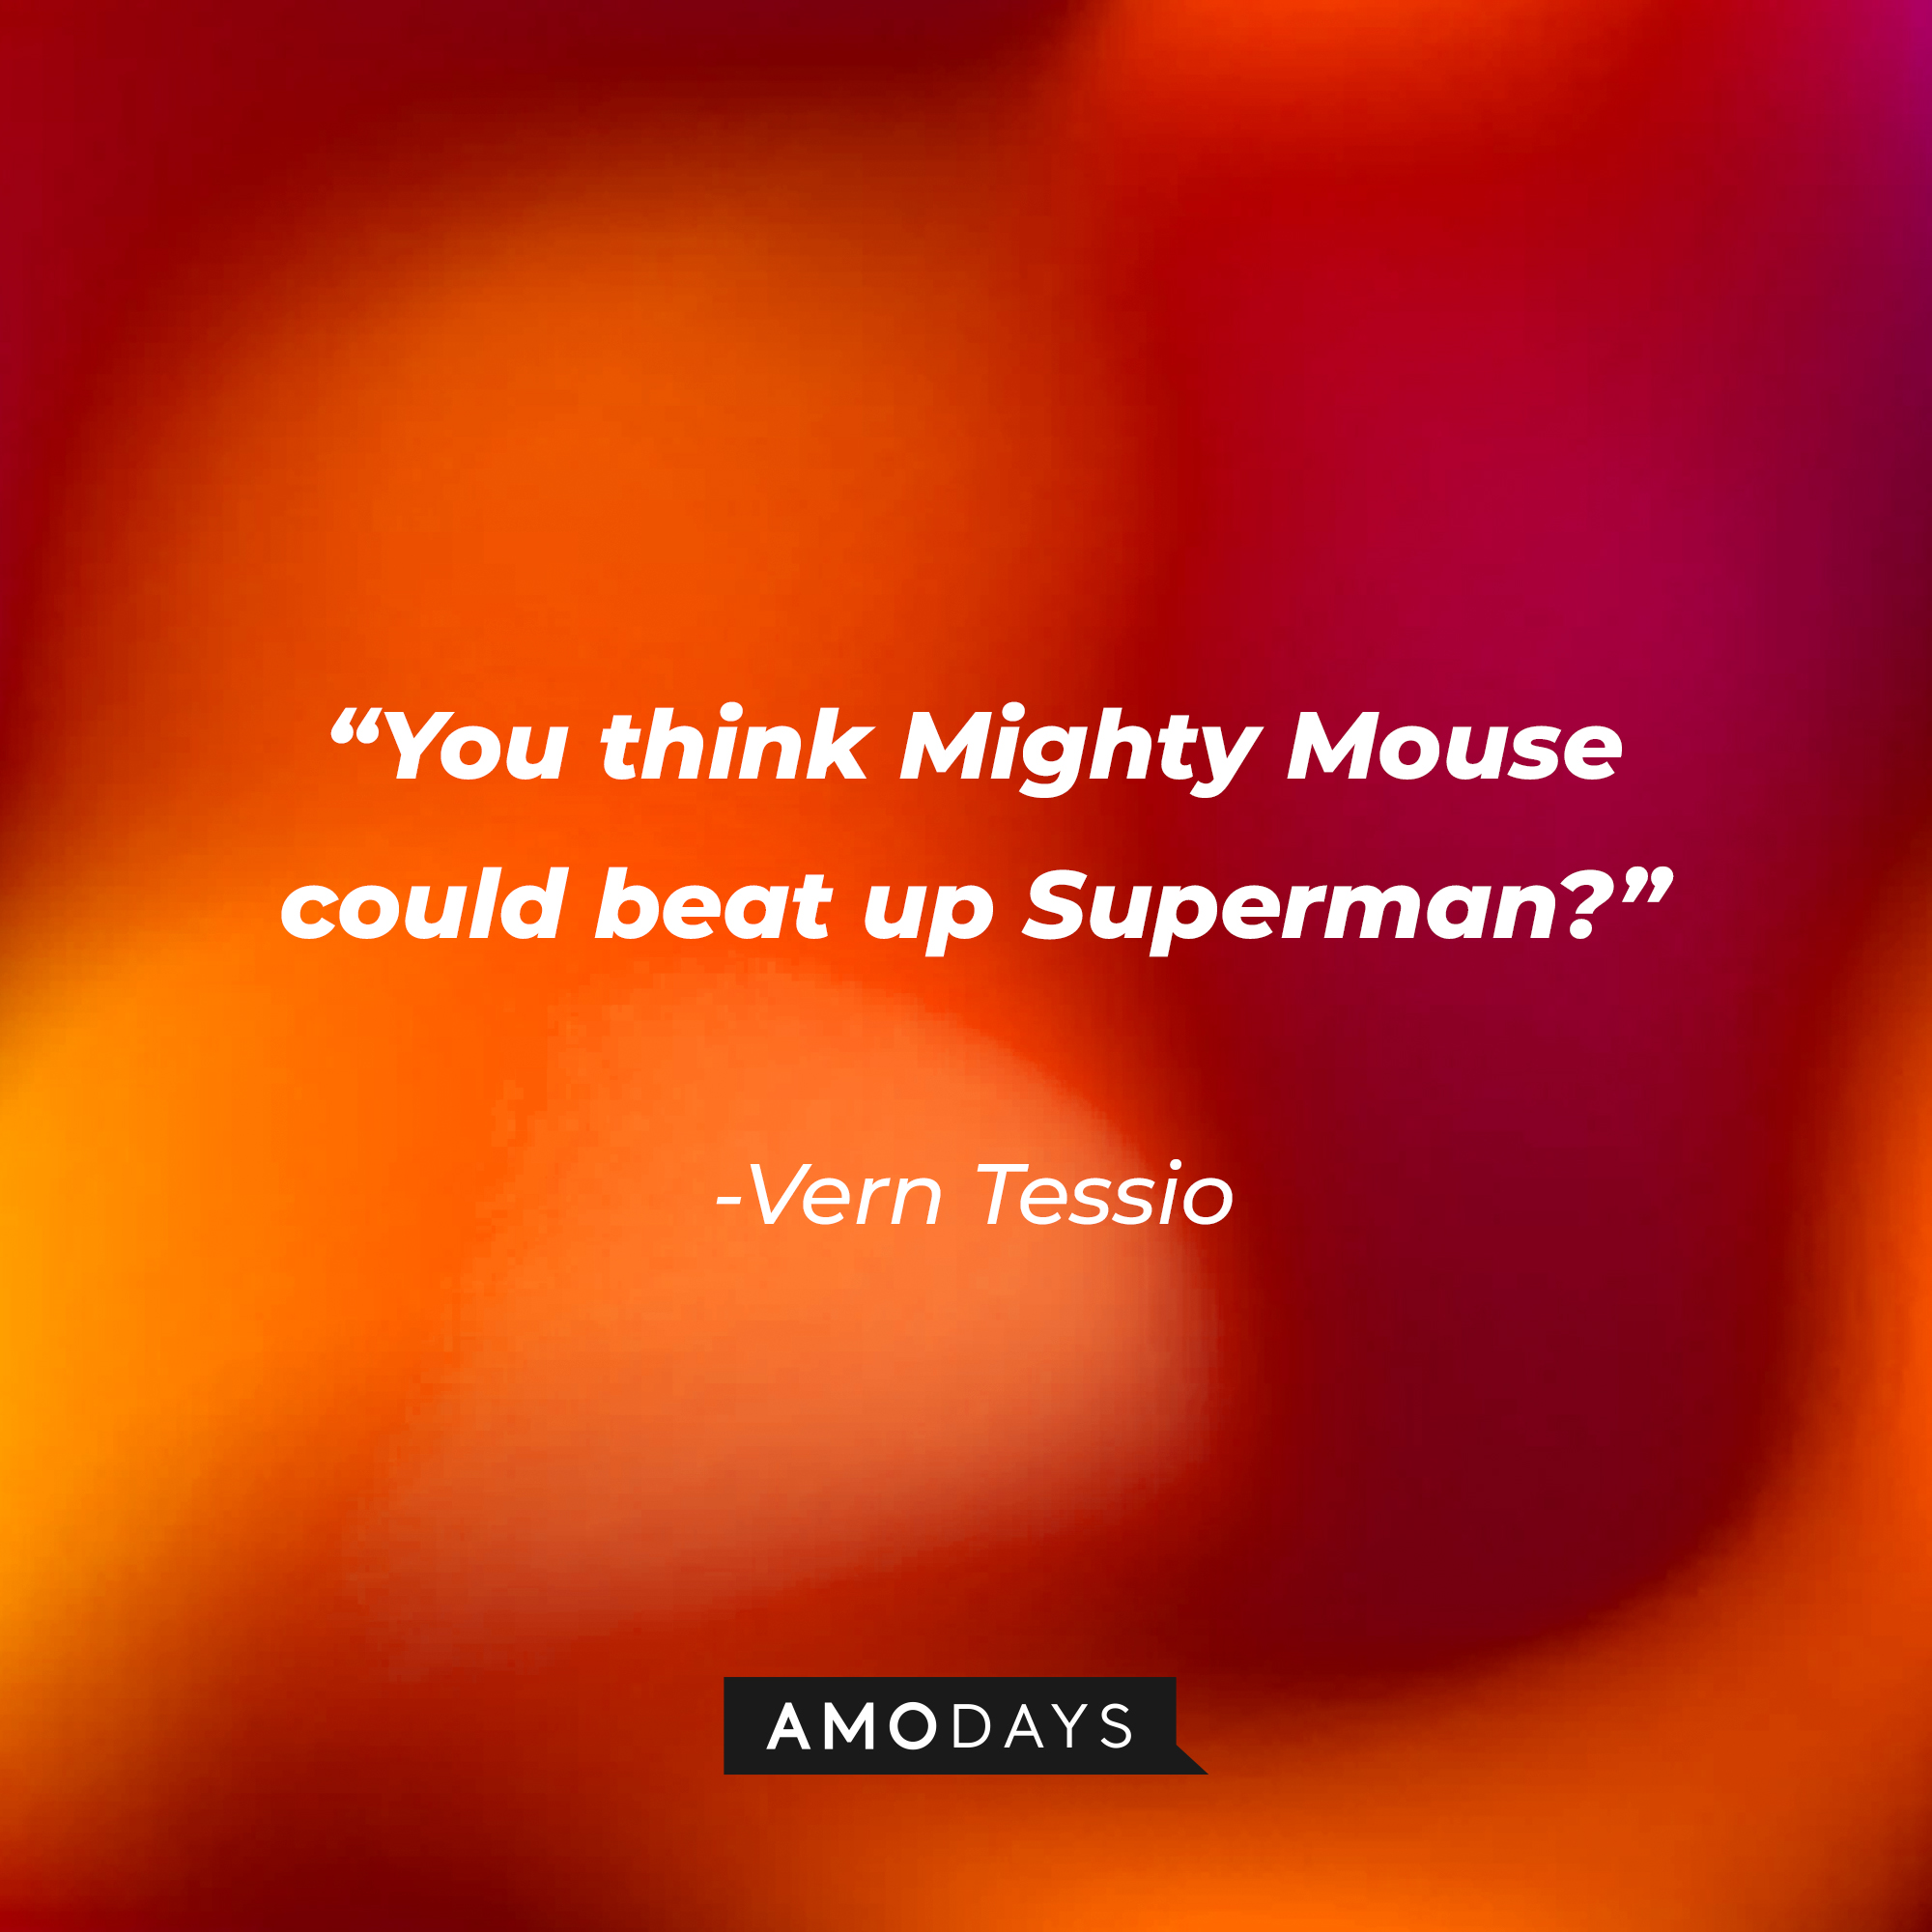 Vern Tessio’s quote: “You think Mighty Mouse could beat up Superman?” | Source: AmoDays